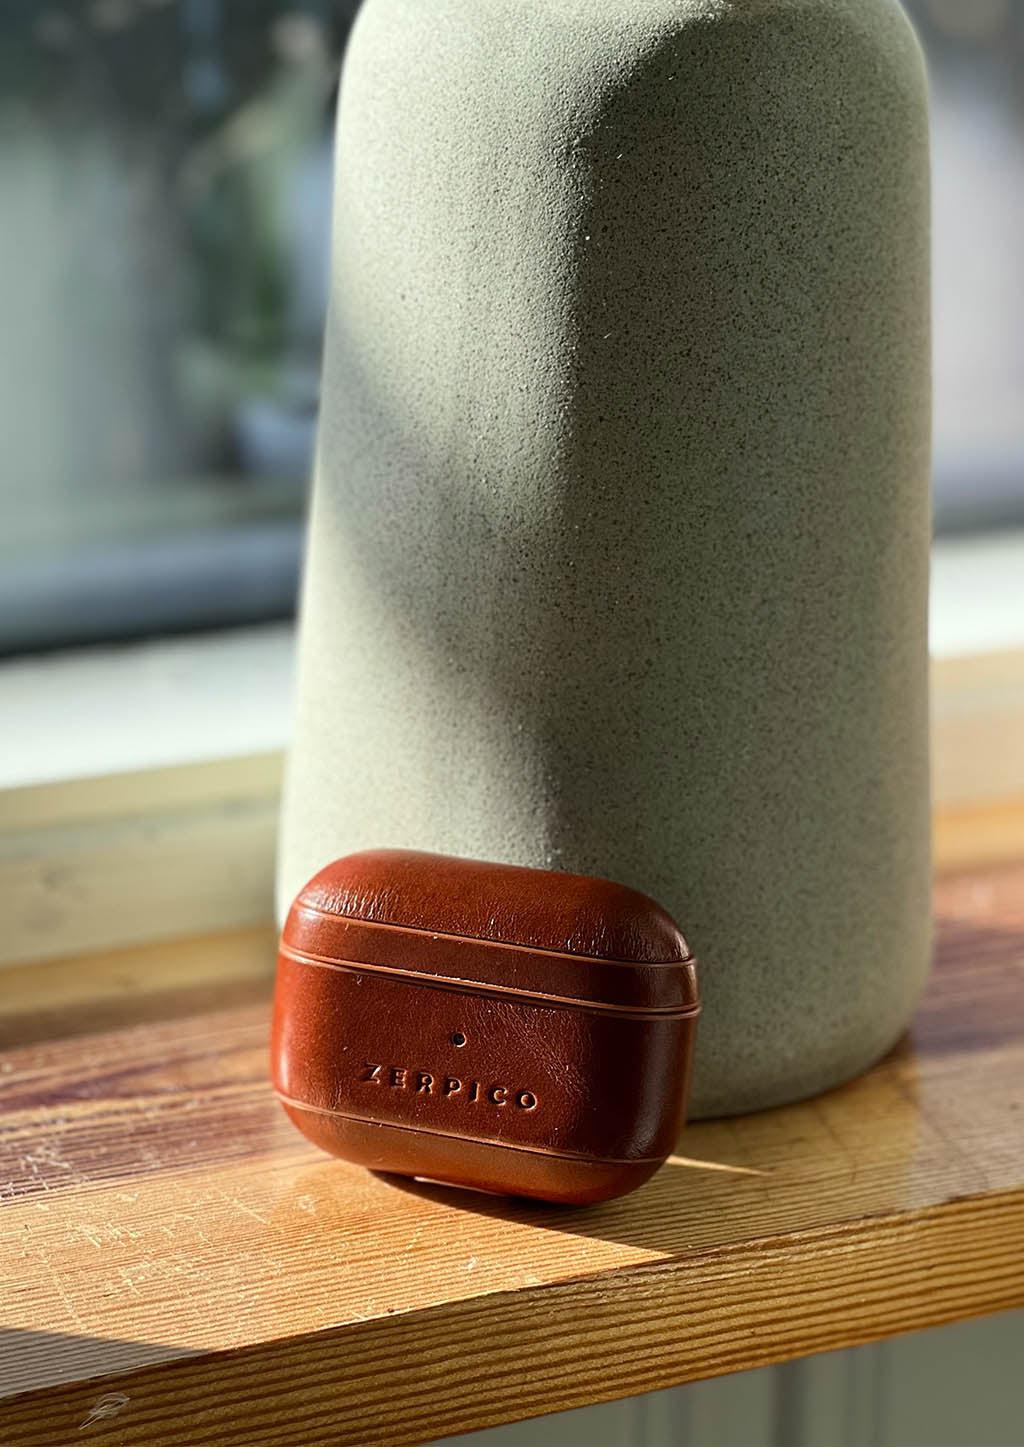 Zerpico Leather Airpods case. Photo taken in the sun.